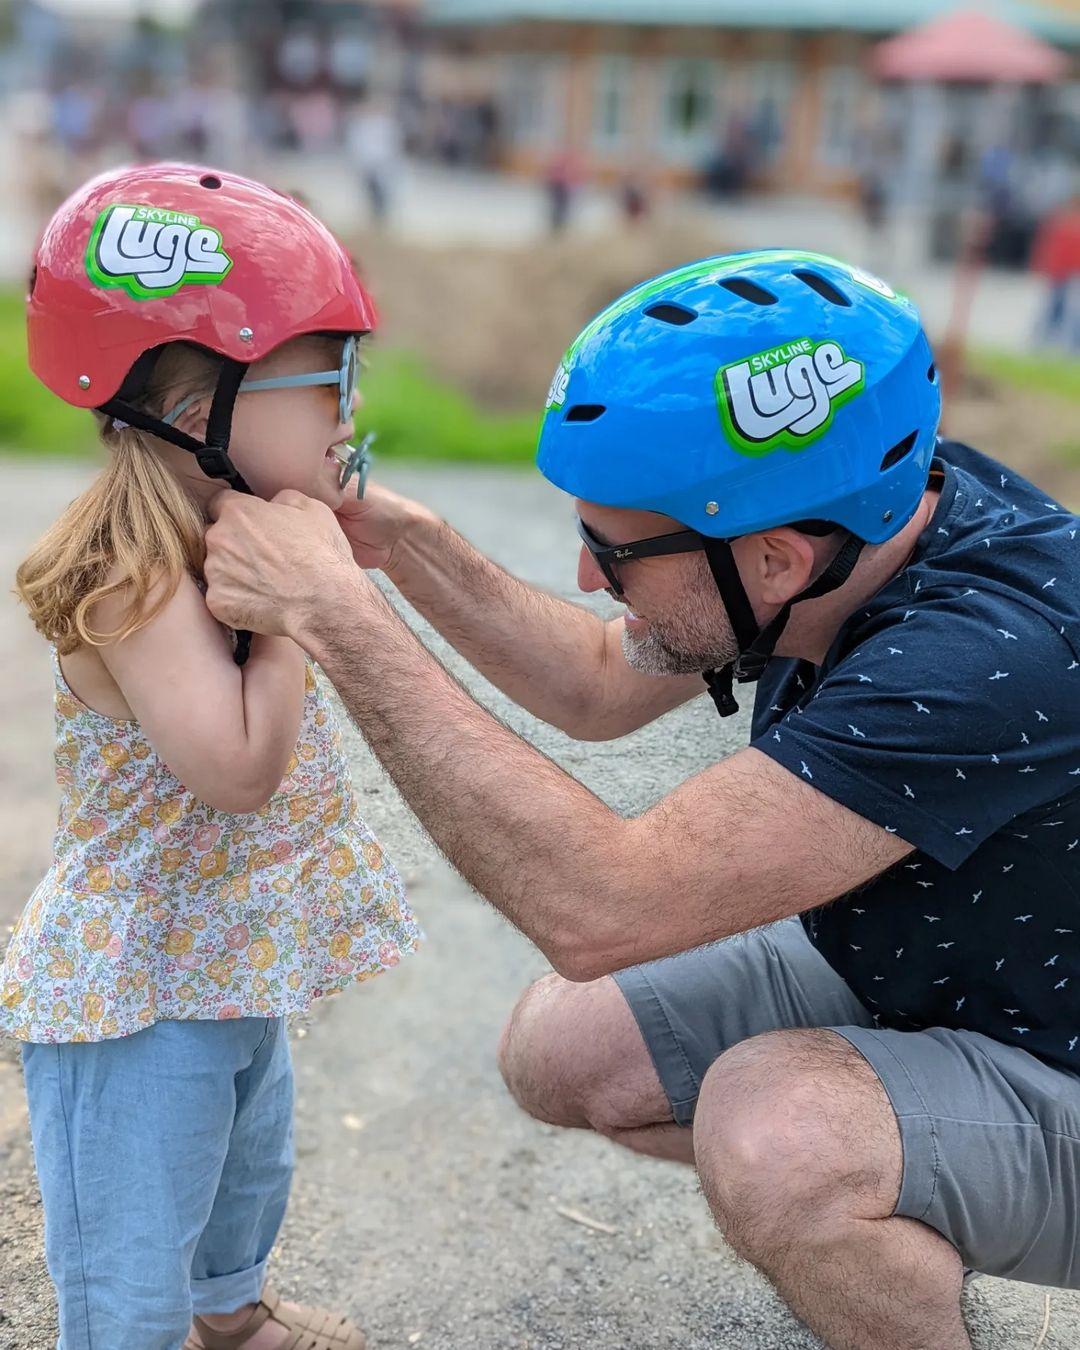 A father makes sure his daughters Luge helmet is tight and secure.